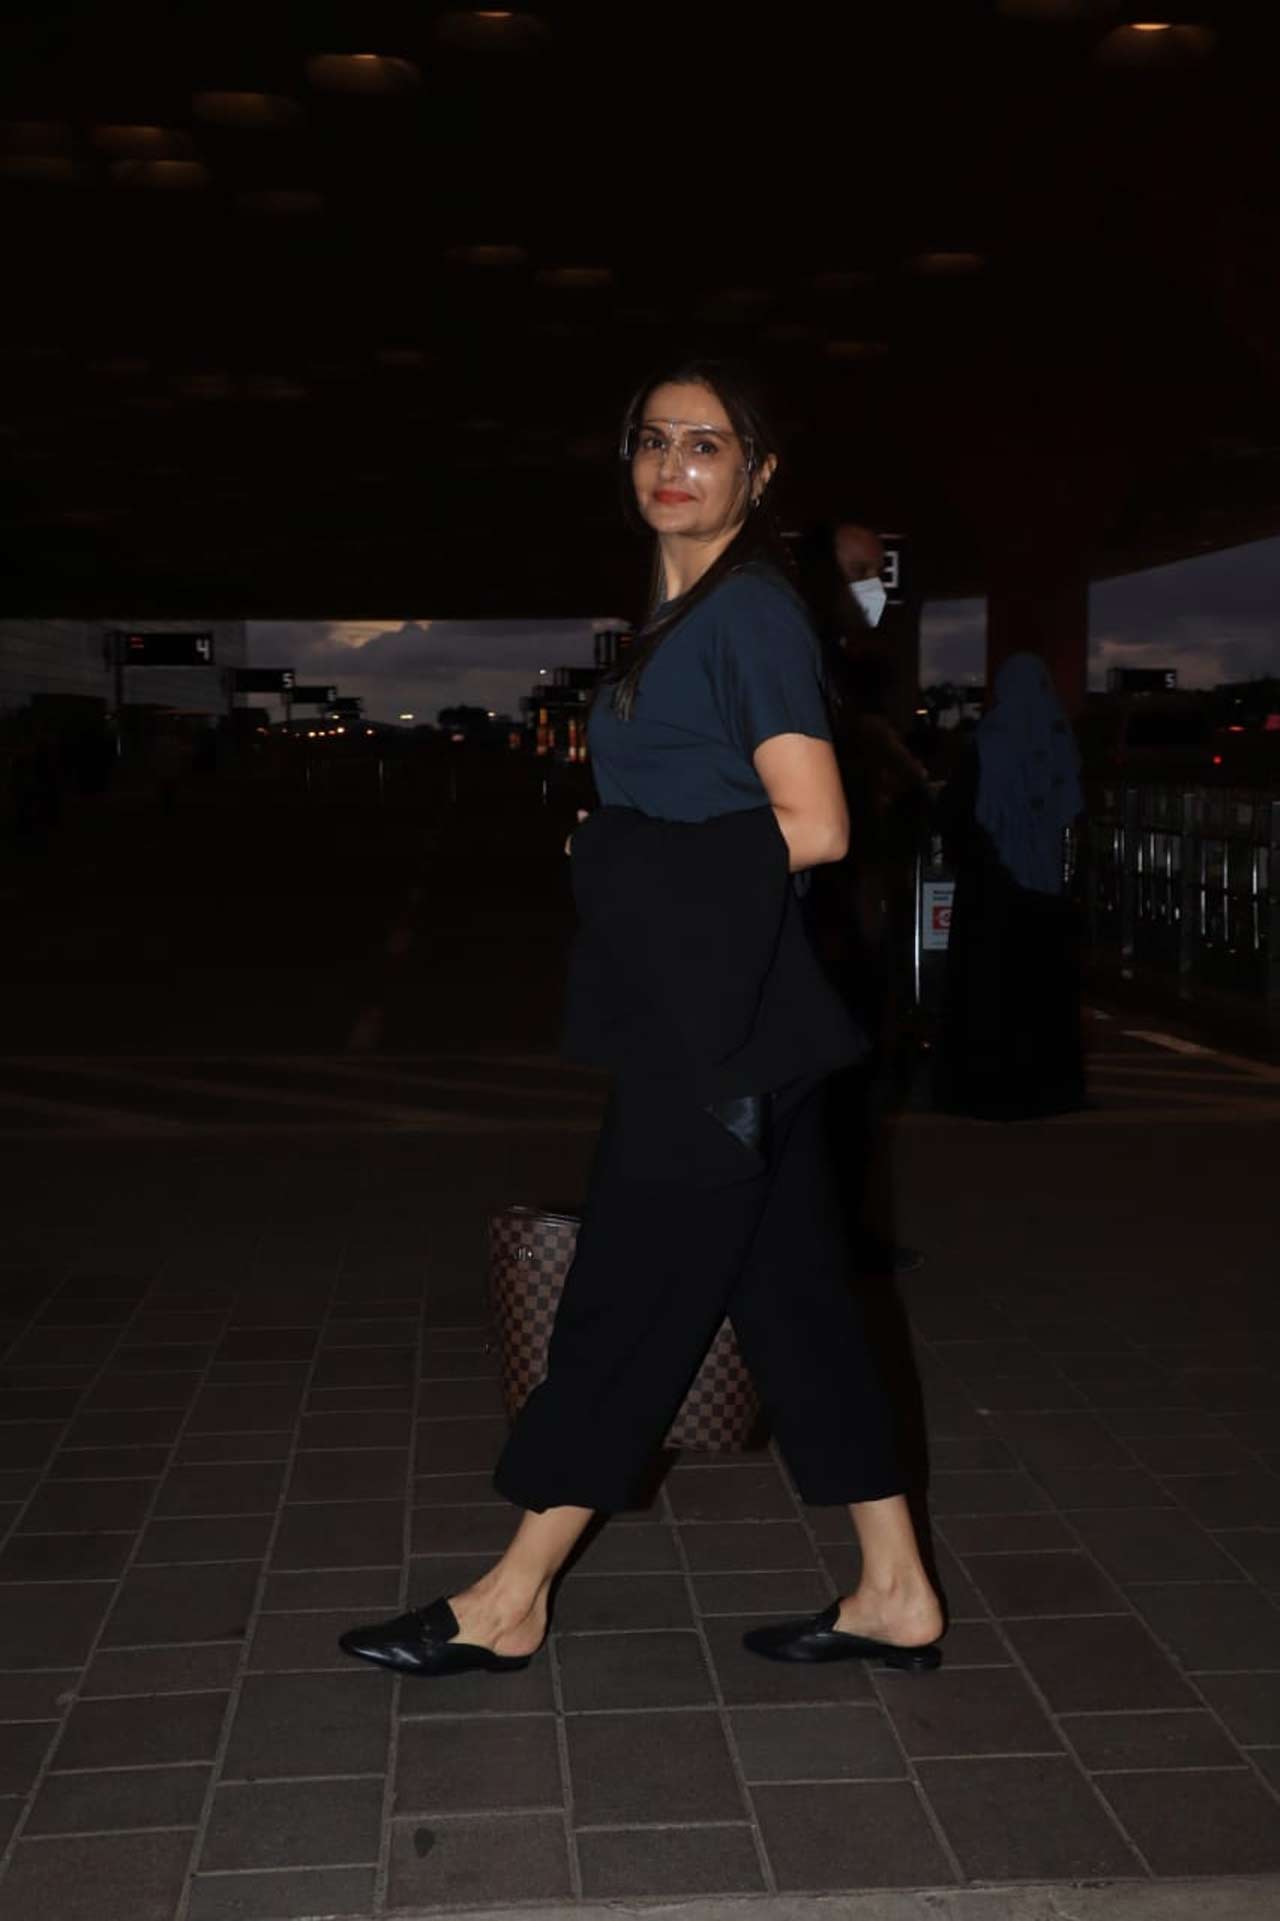 Monica Bedi, the yesteryear actress, posed for the shutterbugs when snapped in at the Mumbai airport. The actress was out to attend an event in Delhi, and she opted for a grey t-shirt, paired with black wide-legged pants as her airport look.